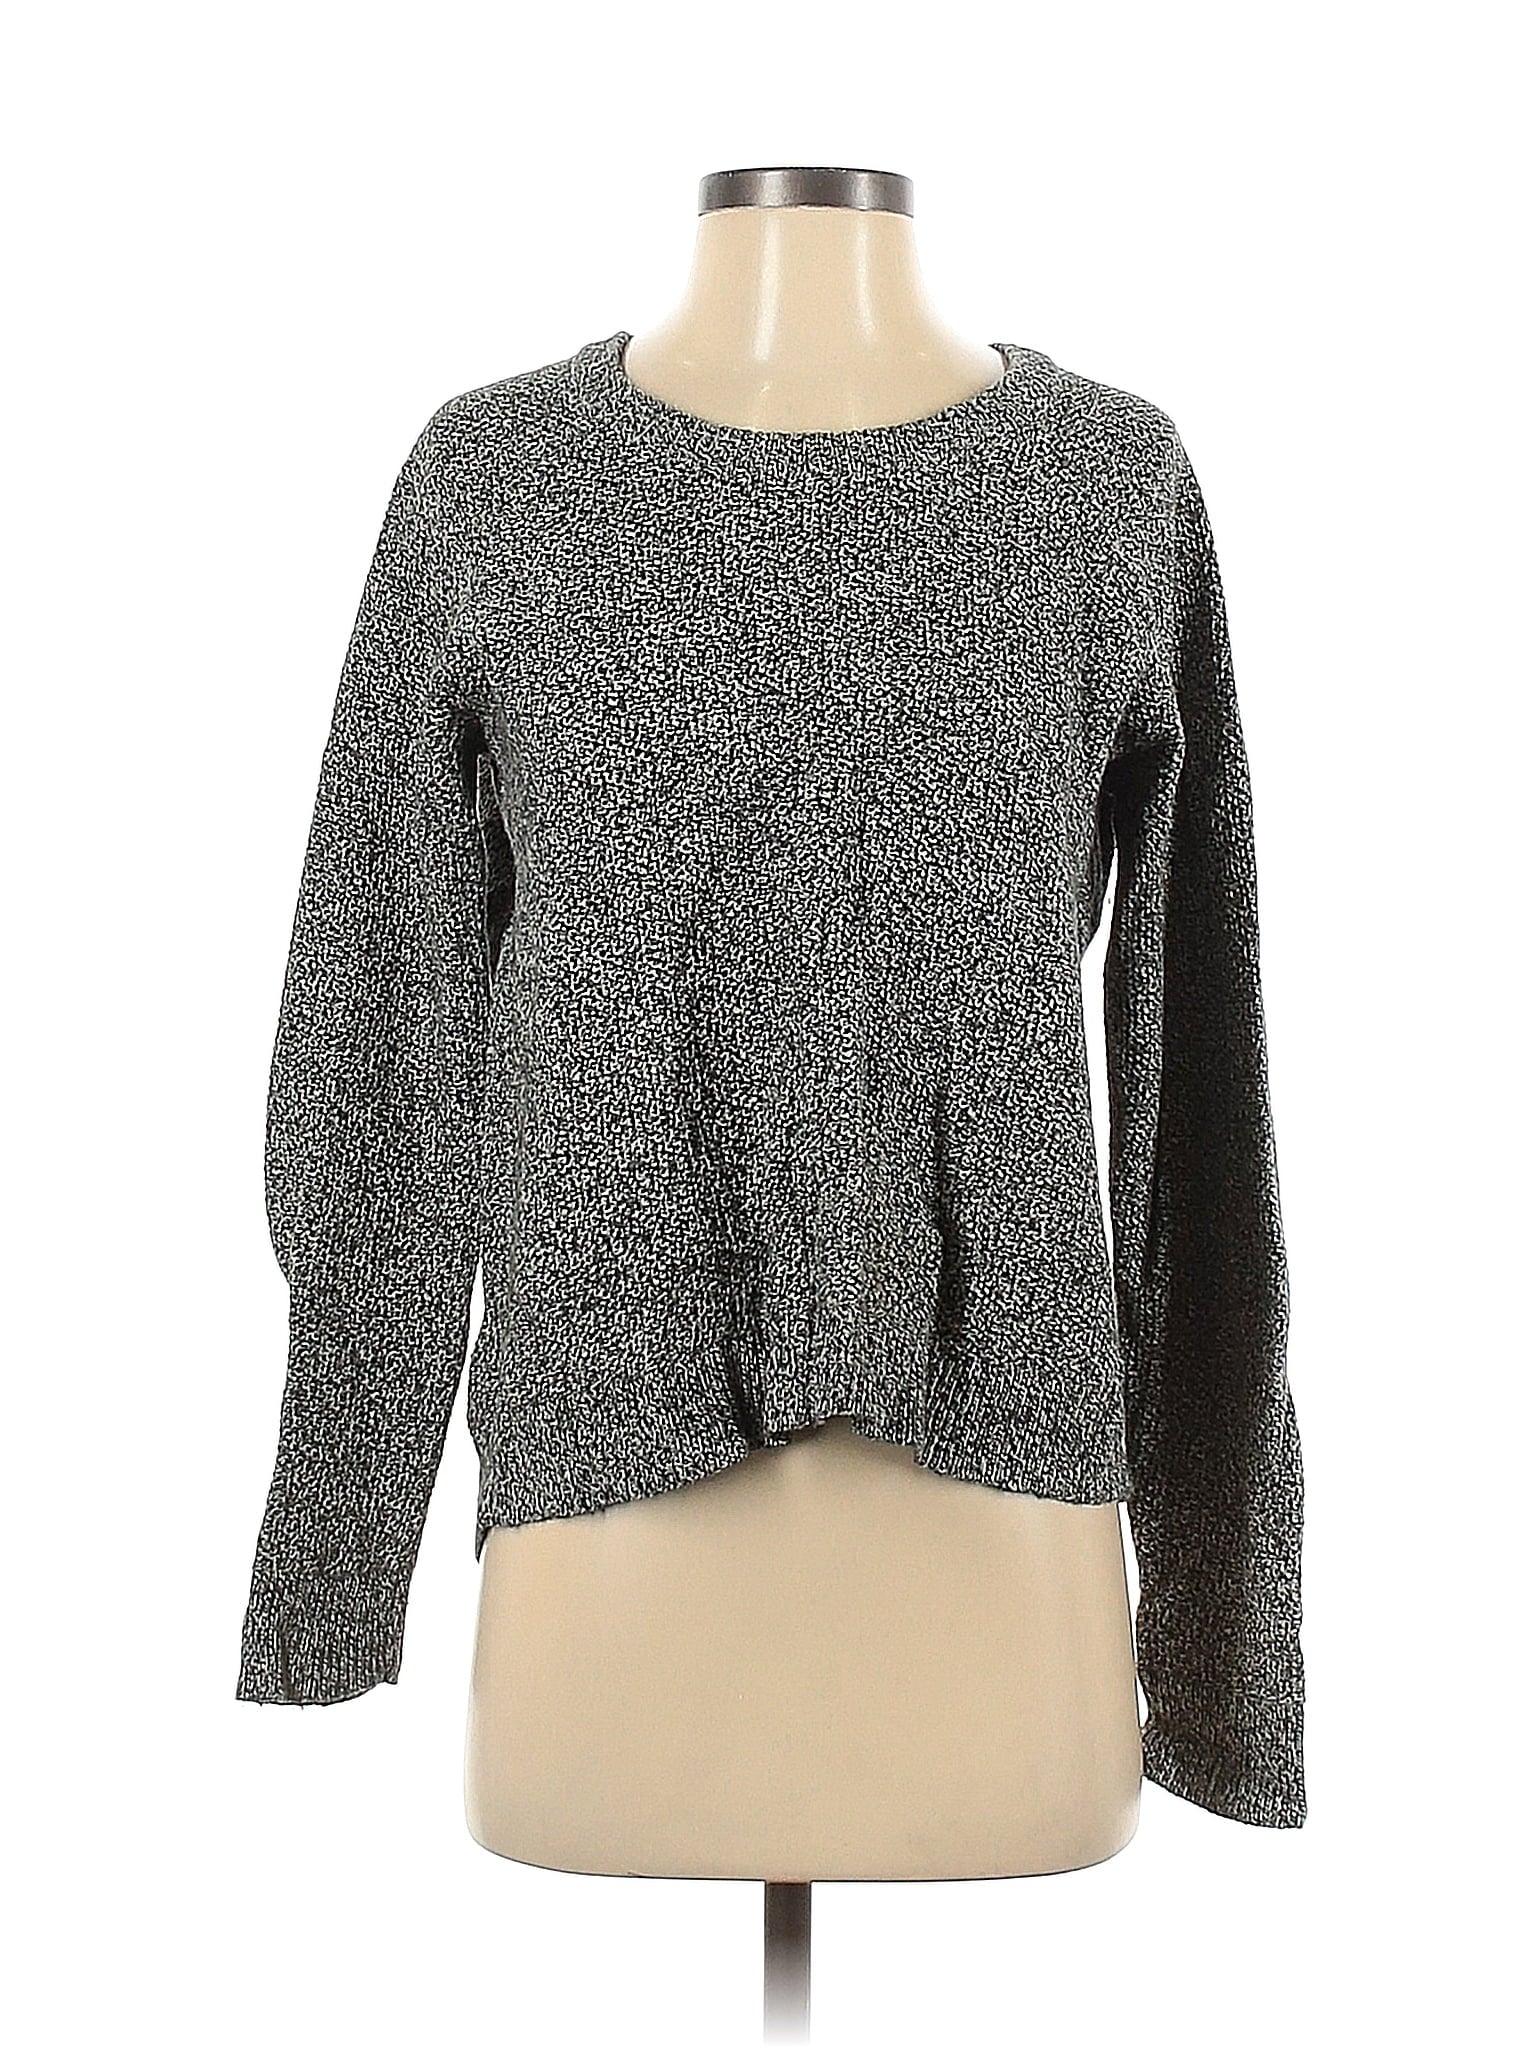 Pullover Sweater size - S